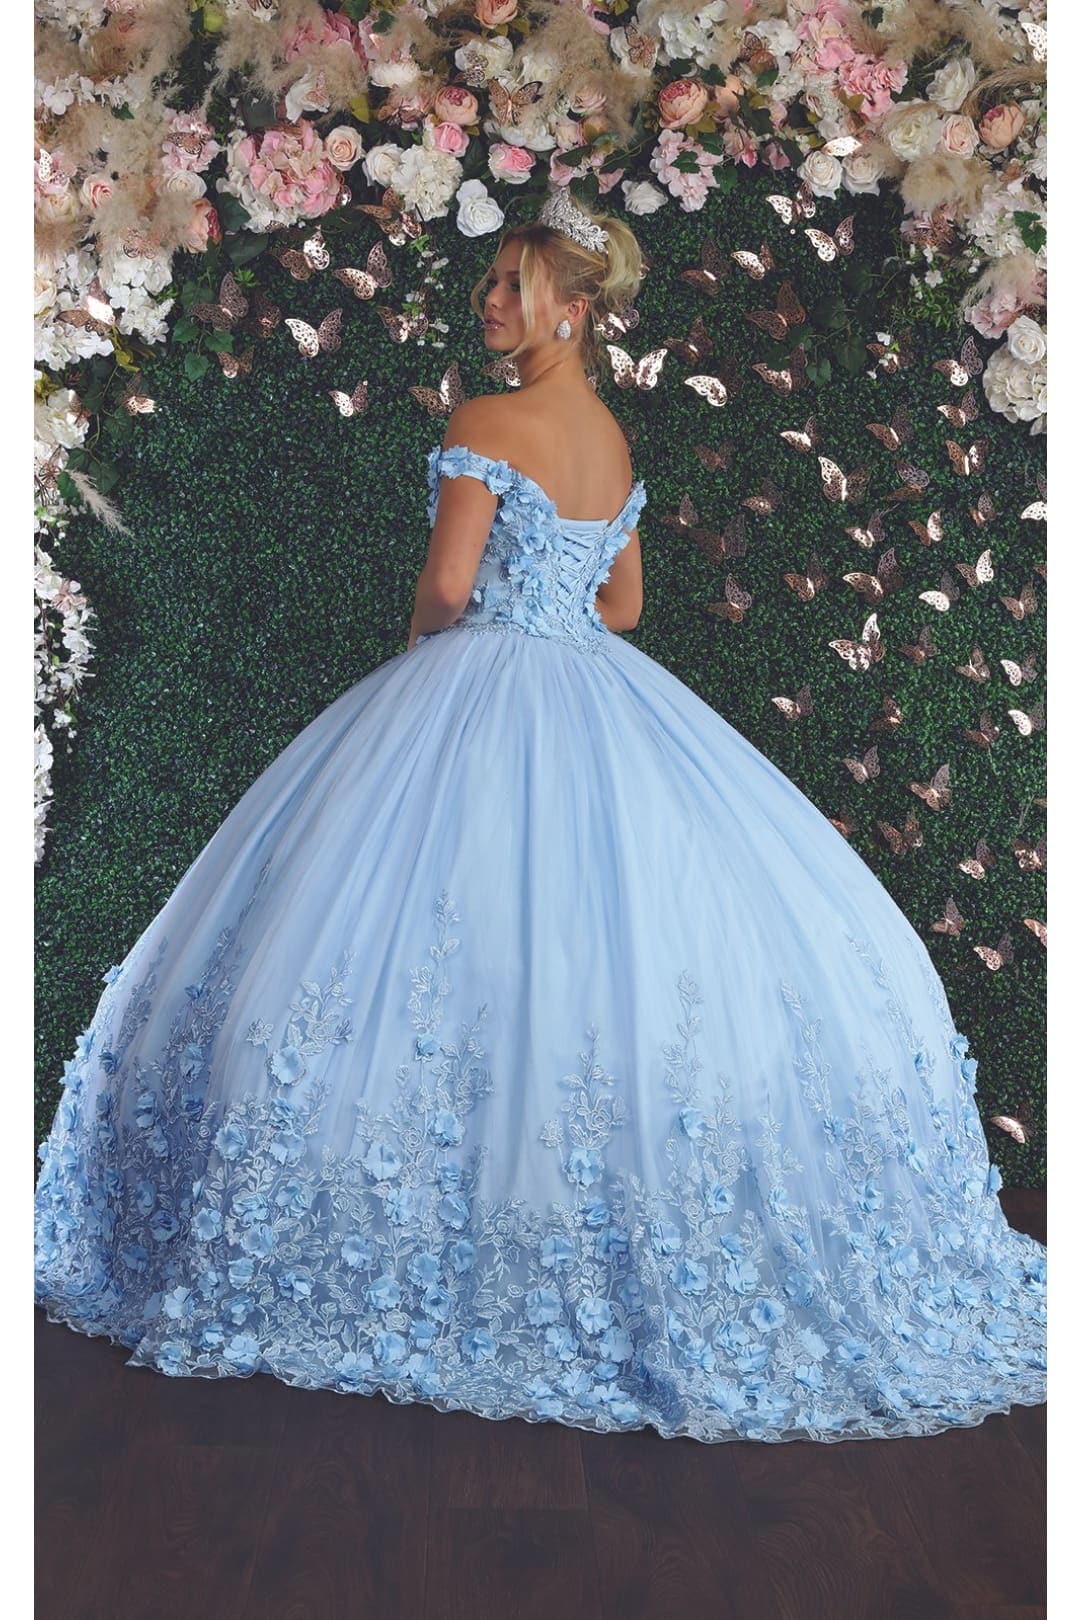 Floral Ball Quinceanera Gown